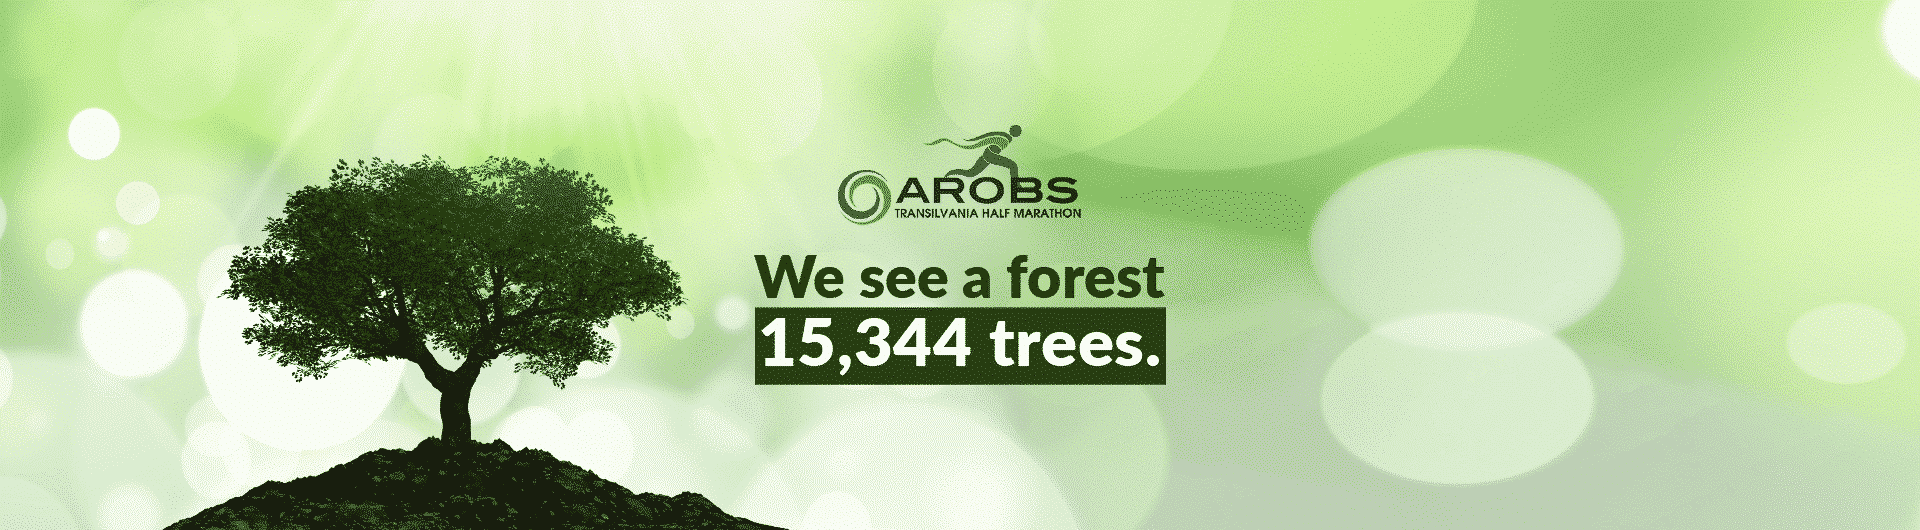 AROBS Forest